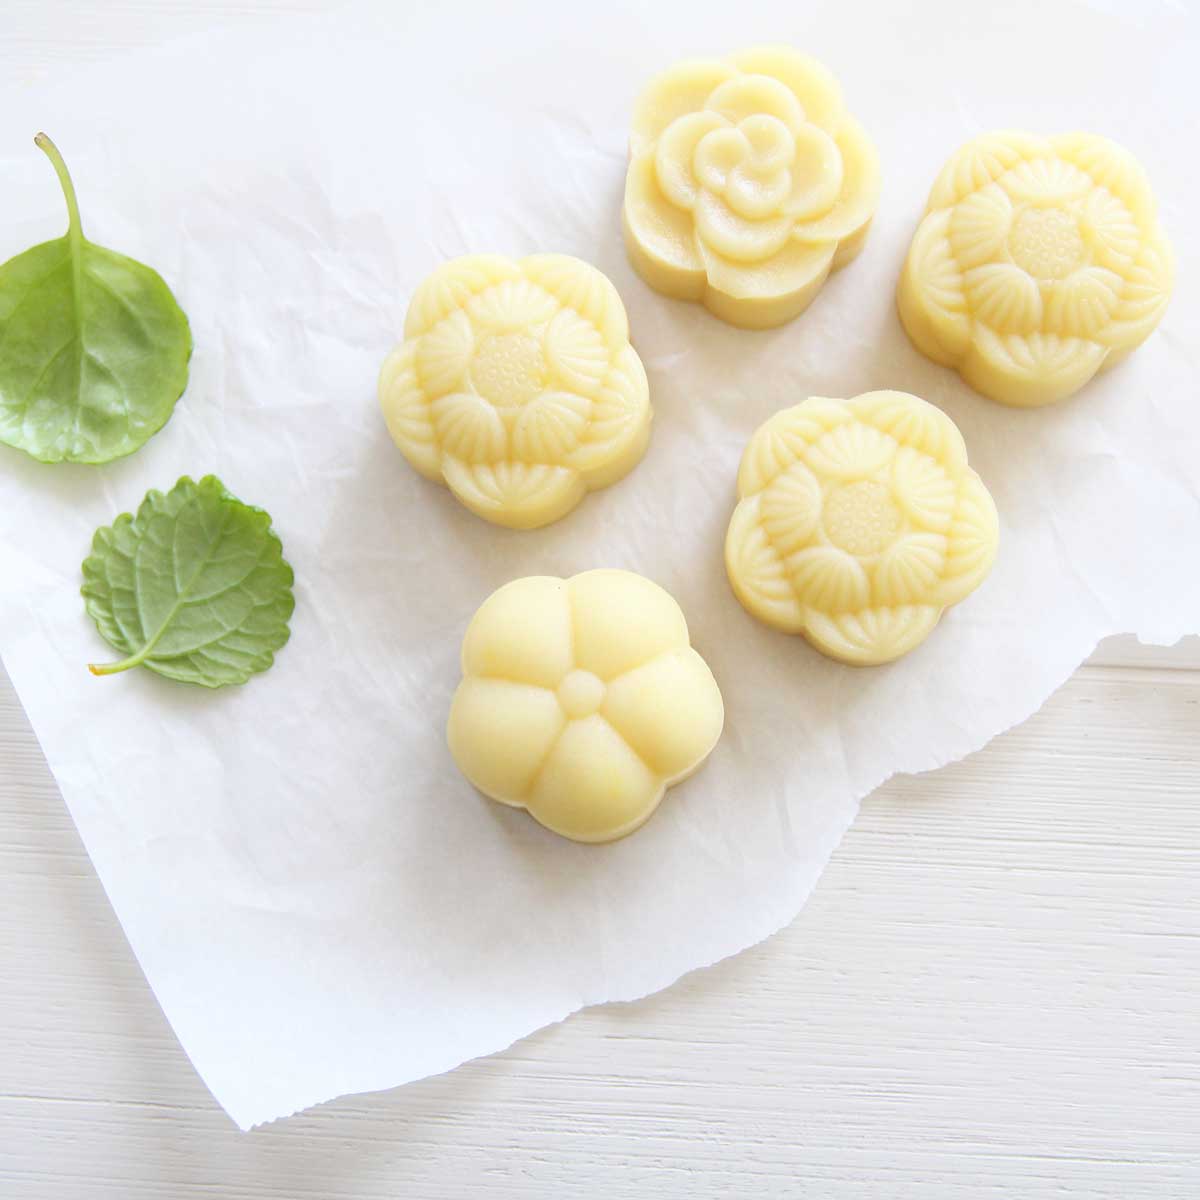 Homemade Durian Snow Skin Mooncakes with Mung Bean Filling - Red Bean Mochi Cake